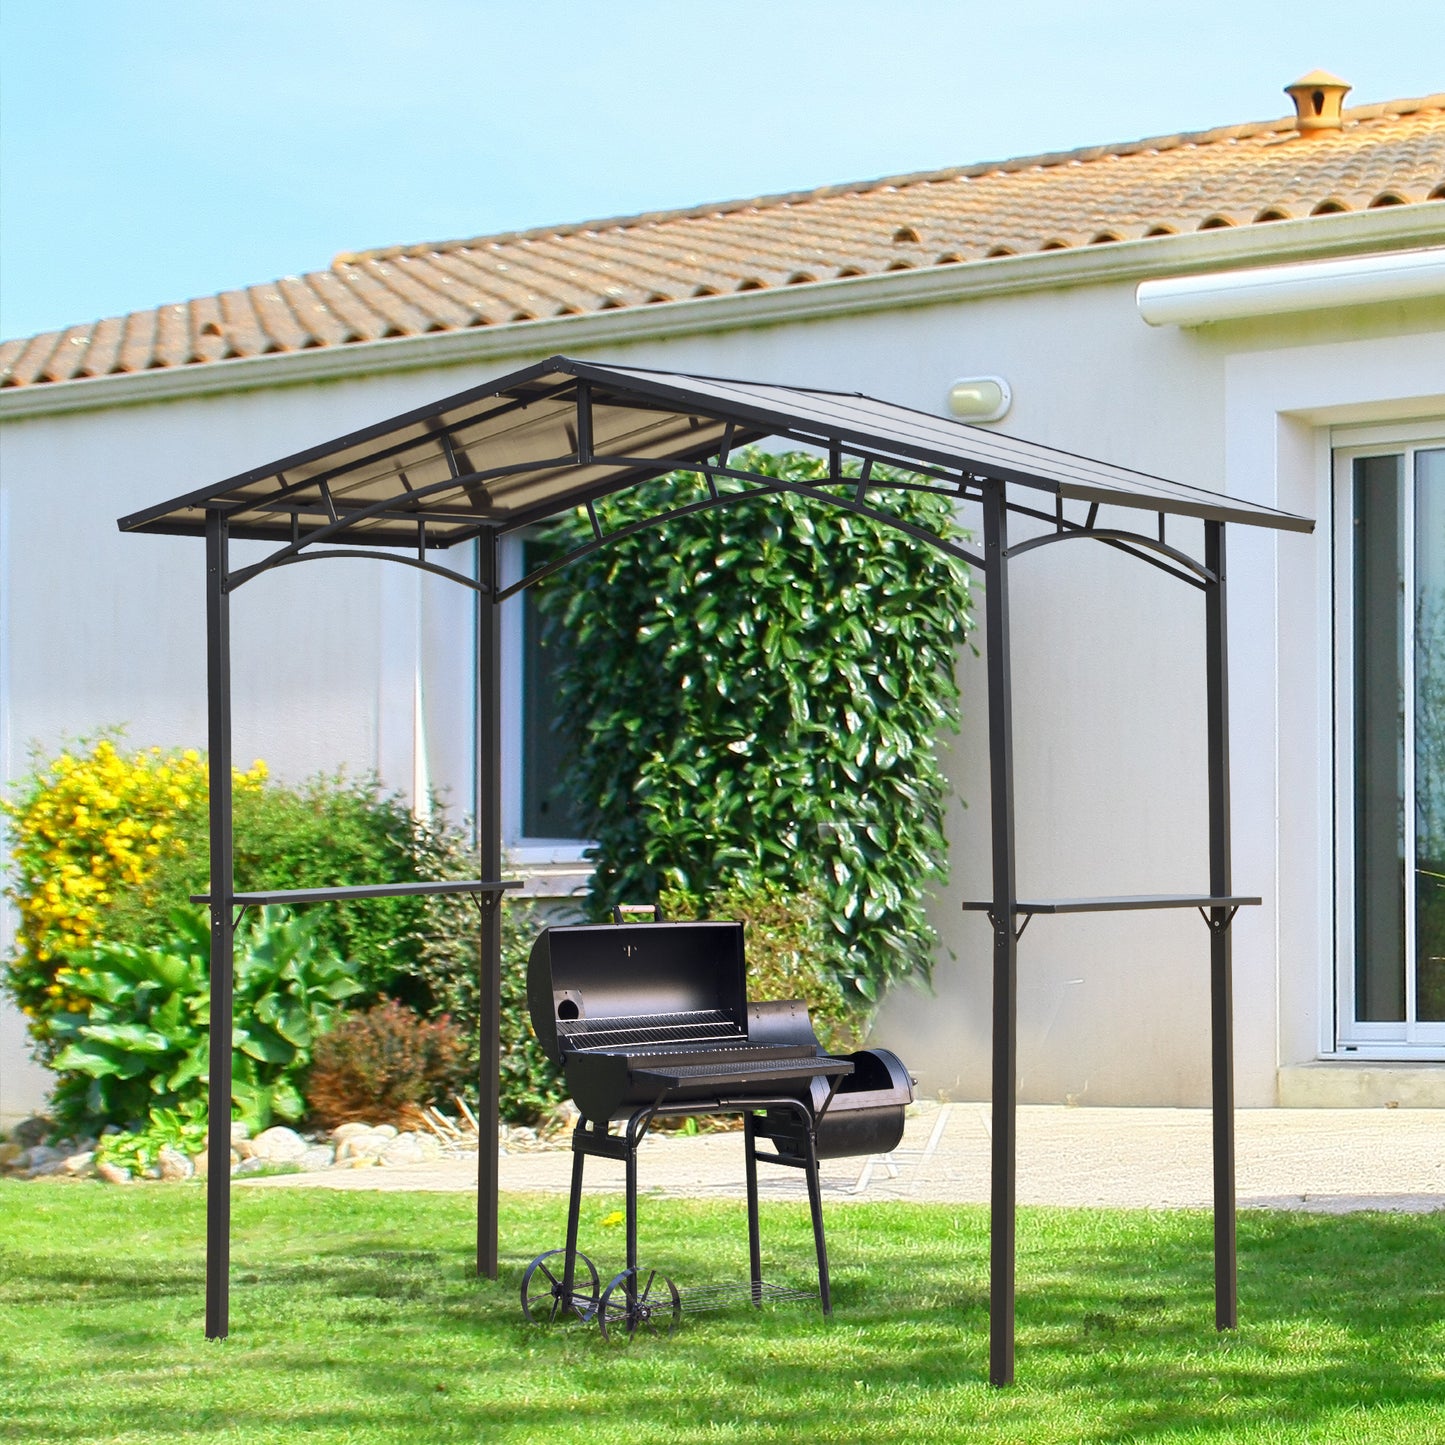 Outsunny 8ft x 5ft Outdoor BBQ Protective Gazebo Tent Aluminium Steel Frame w/ 2 Shelves Hardtop Roof Canopy Ground Stakes Safe Cooking